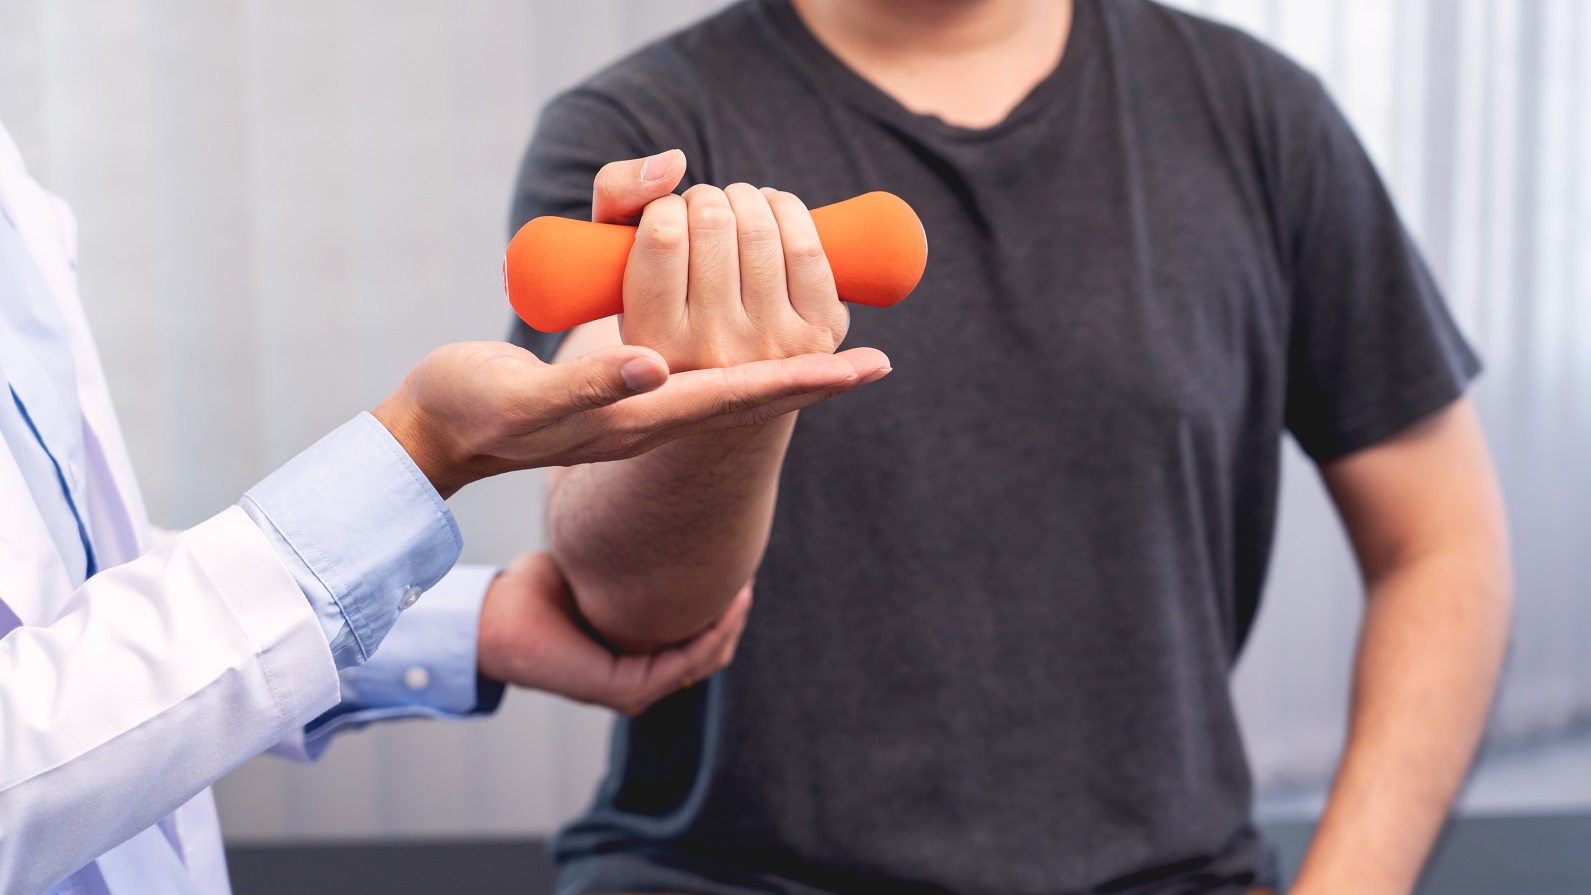 A doctor helping a patient to lift a dumbbell